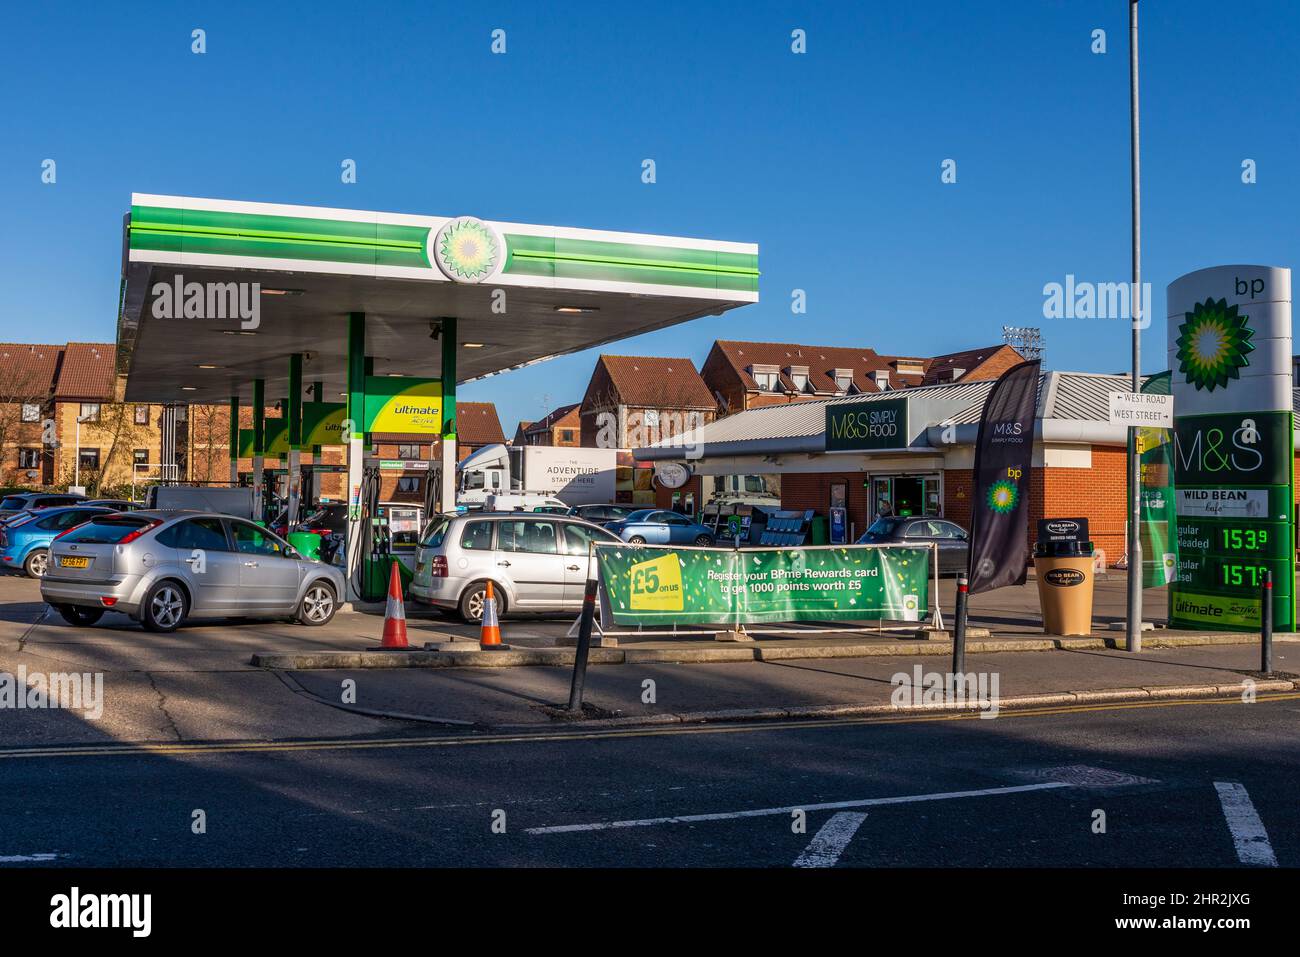 Southend on Sea, Essex, UK. 25th Feb, 2022. The risk of rising fuel prices due to the situation in Ukraine has caused people to queue at petrol stations to fill up in the UK. The fuel prices at a BP garage in Southend on Sea have increased to a very high price per litre Stock Photo